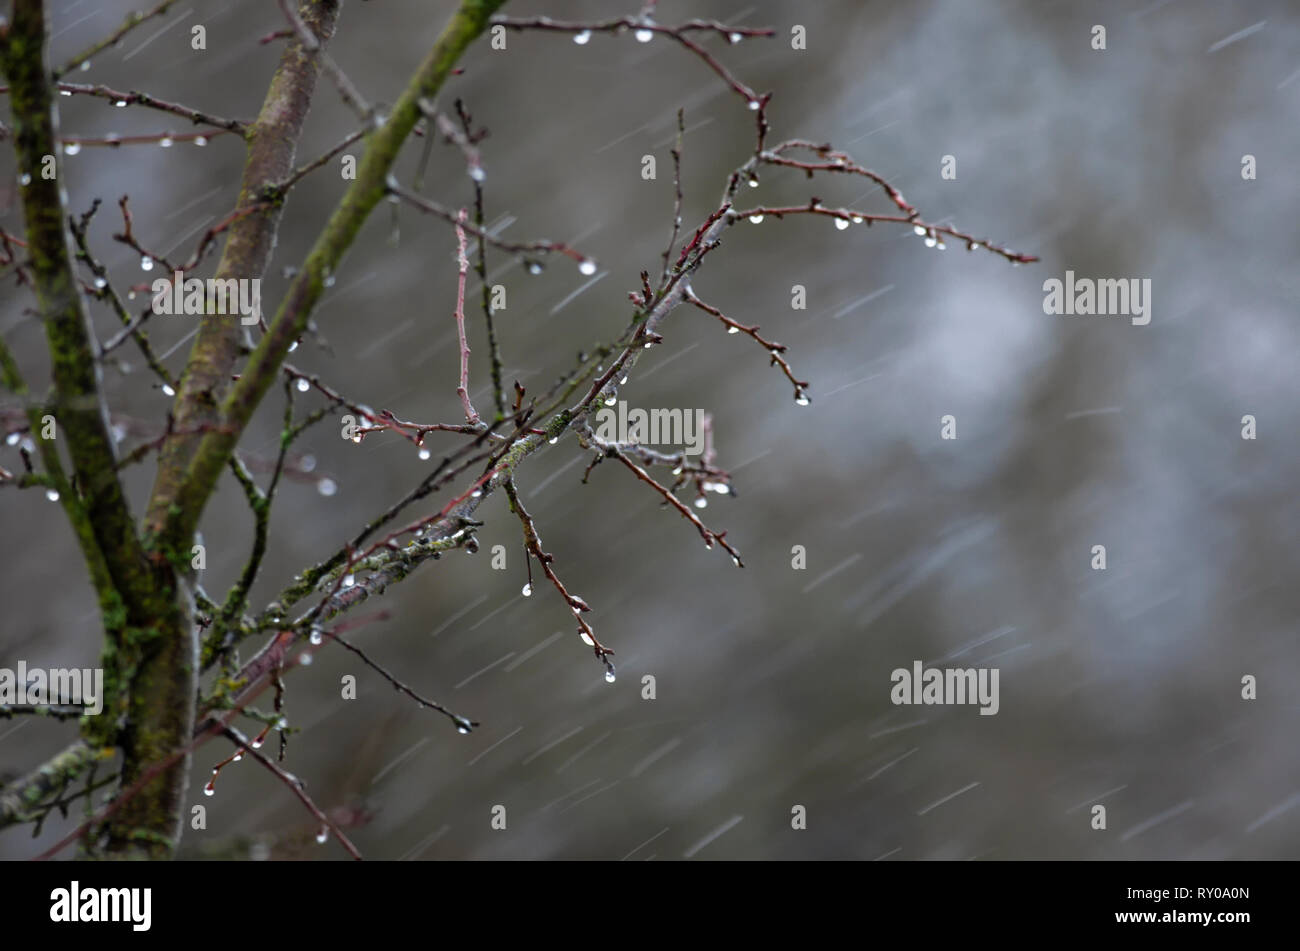 Shiny droplets of water on the tips of the branches of the bush during the spring rain Stock Photo